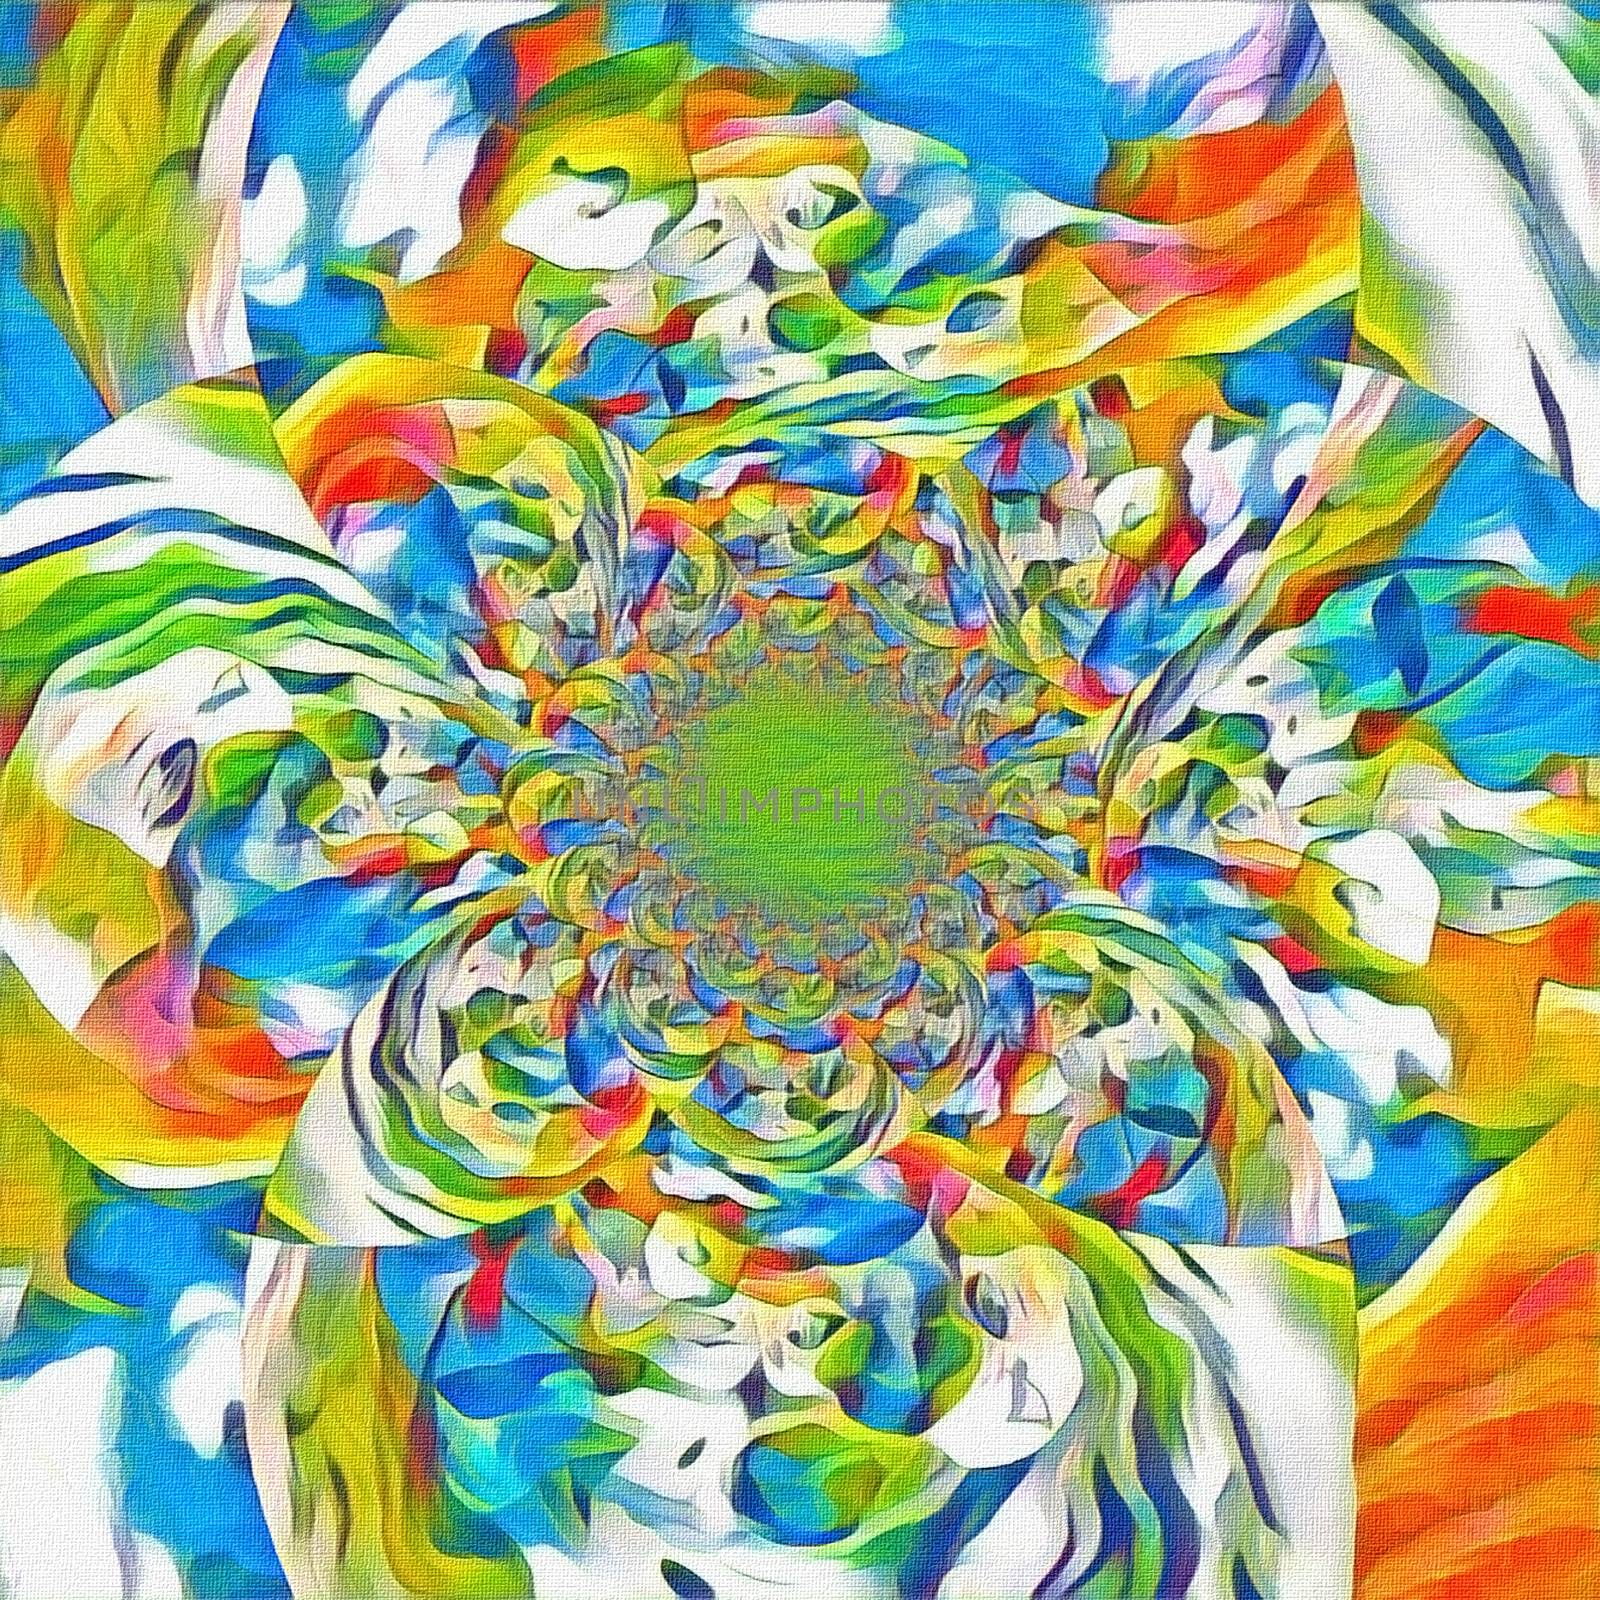 Abstract painting. Mirrored round fractal in multi colors.